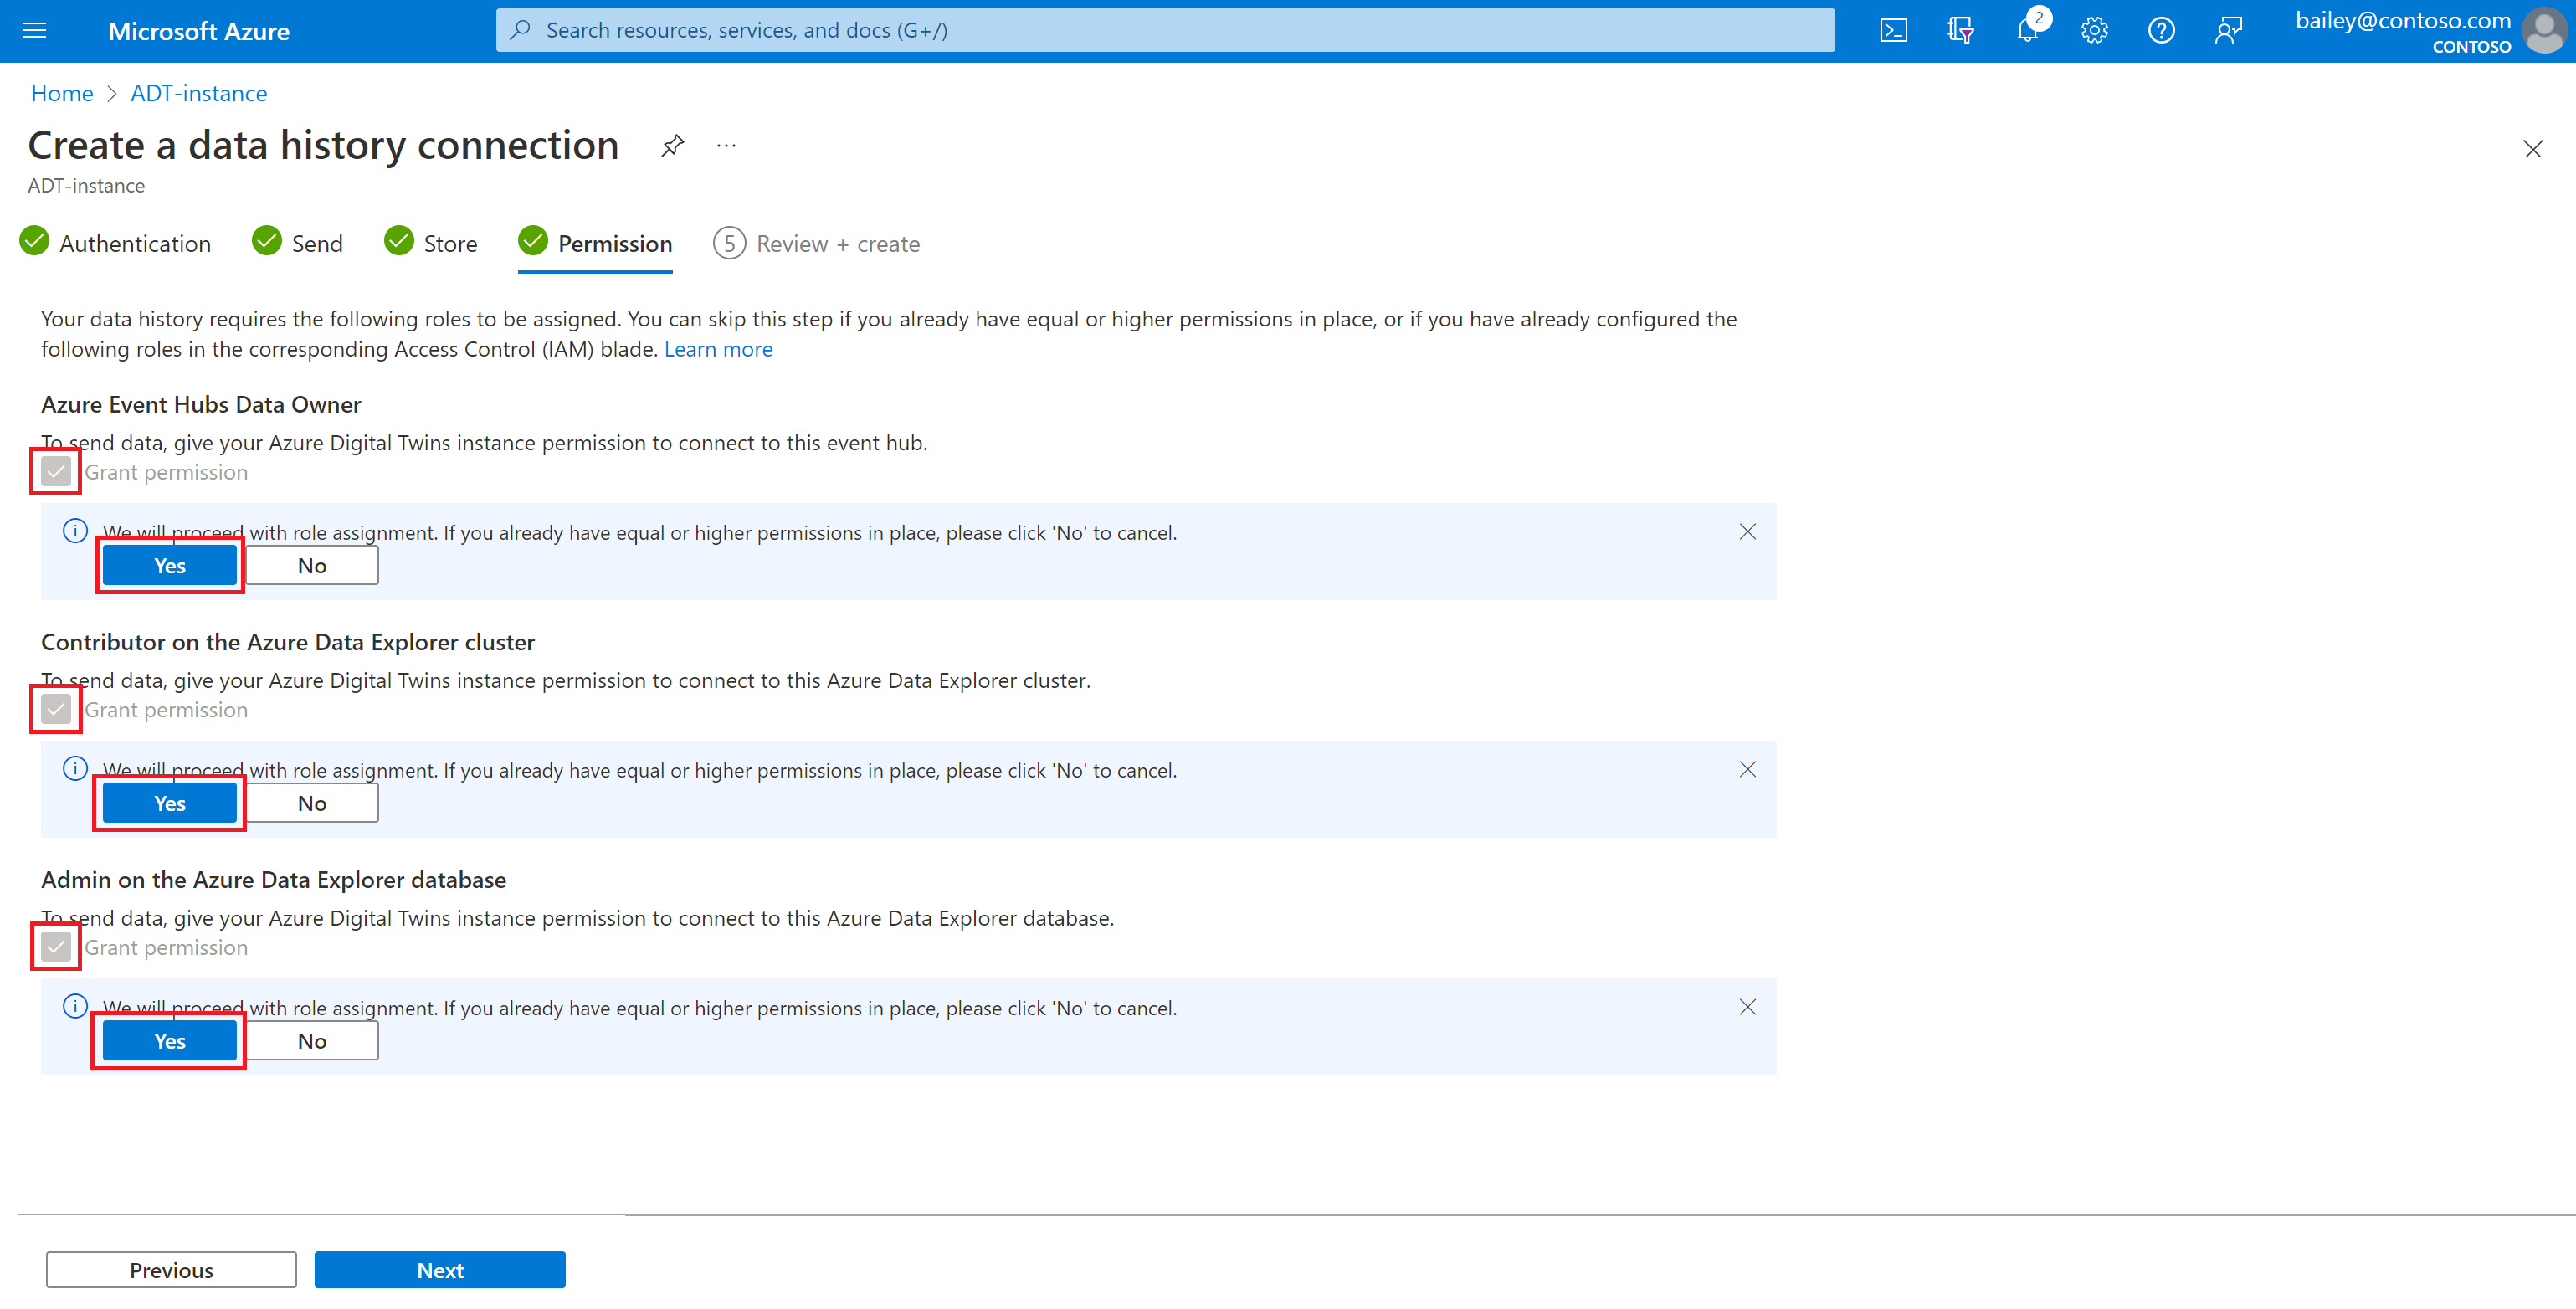 Screenshot of the Azure portal showing the Permission step in the data history connection setup.